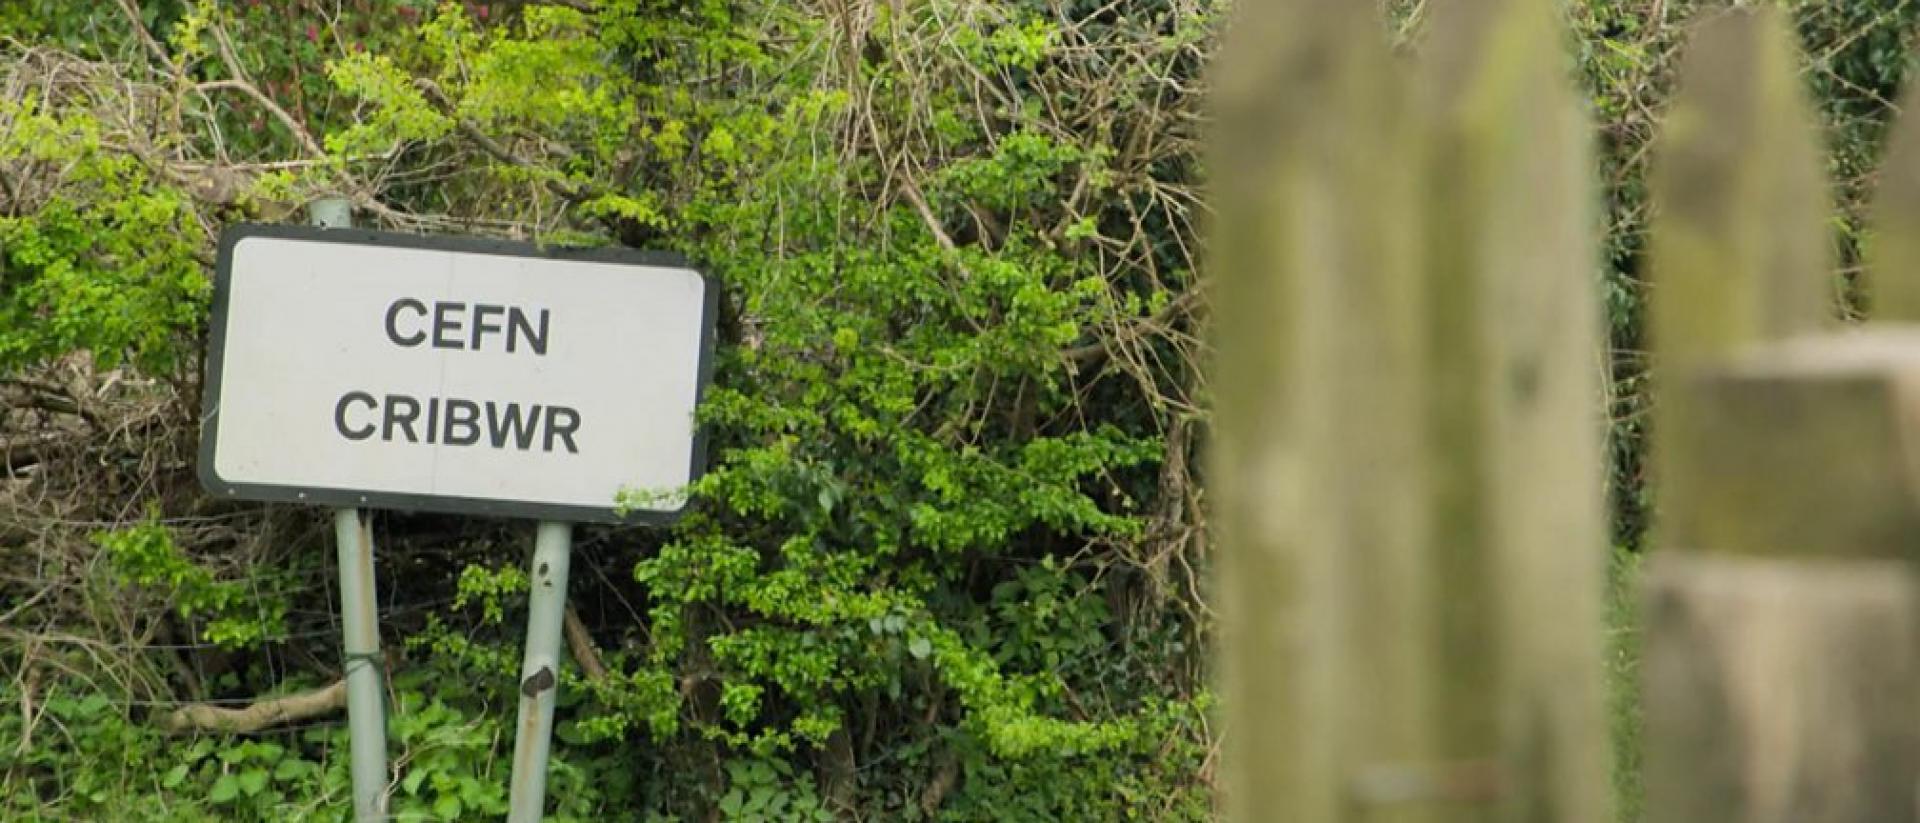 Still from Two B or Not Two B featuring a road sign that says Cefn Cribwr in front of a bush.